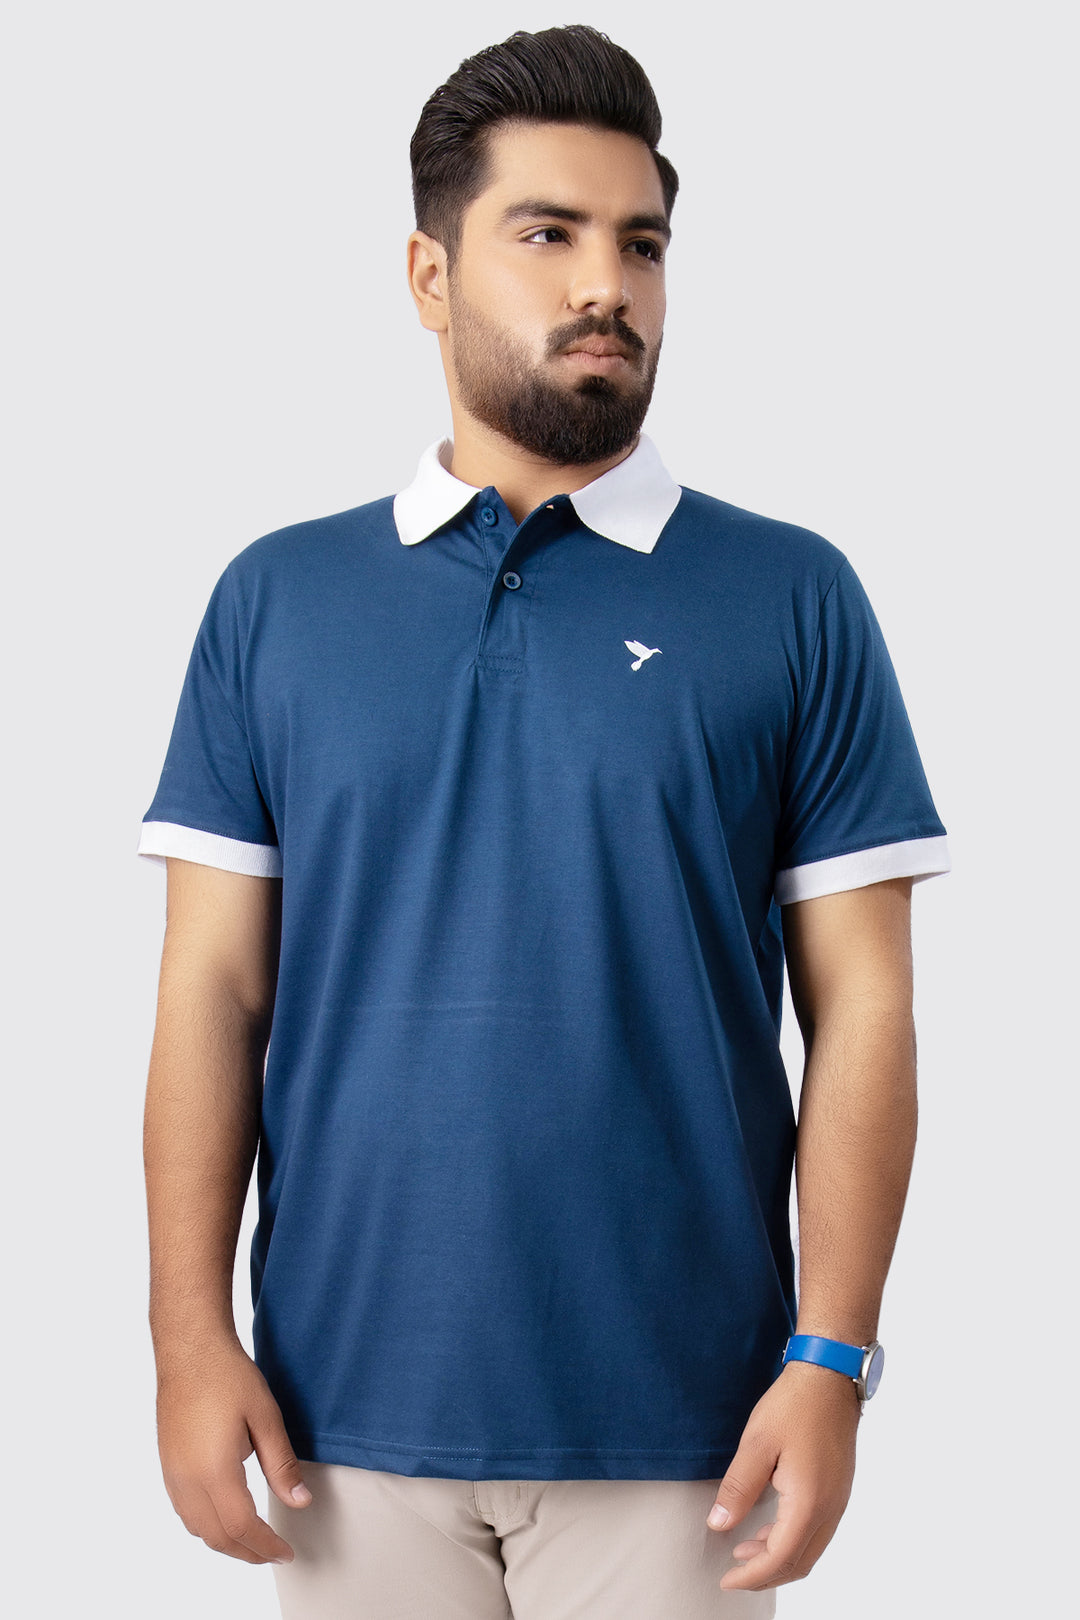 Blue Contrast Embroidered Polo Shirt (Plus Size) - A23 - MP0202P